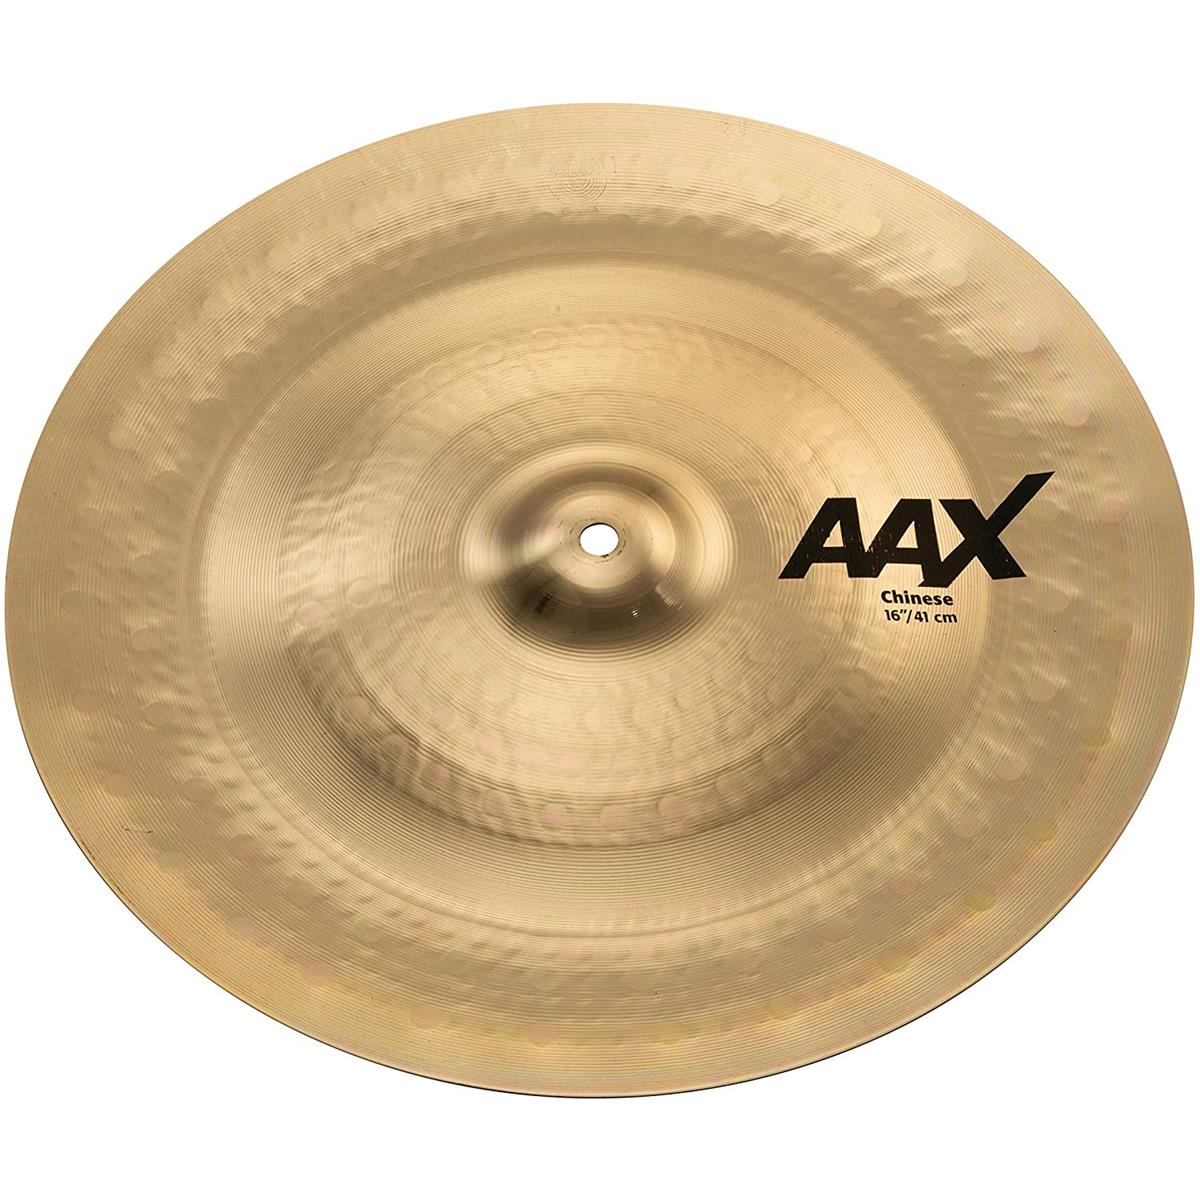 Sabian 16" AAX Chinese Cymbal, Thin, Brilliant Finish SABIAN 16" AAX Chinese delivers Modern Bright, biting response that is big, brash and trashy. The SABIAN AAX series delivers consistently bright, crisp, clear and cutting responses - AAX is the ultimate Modern Bright sound!